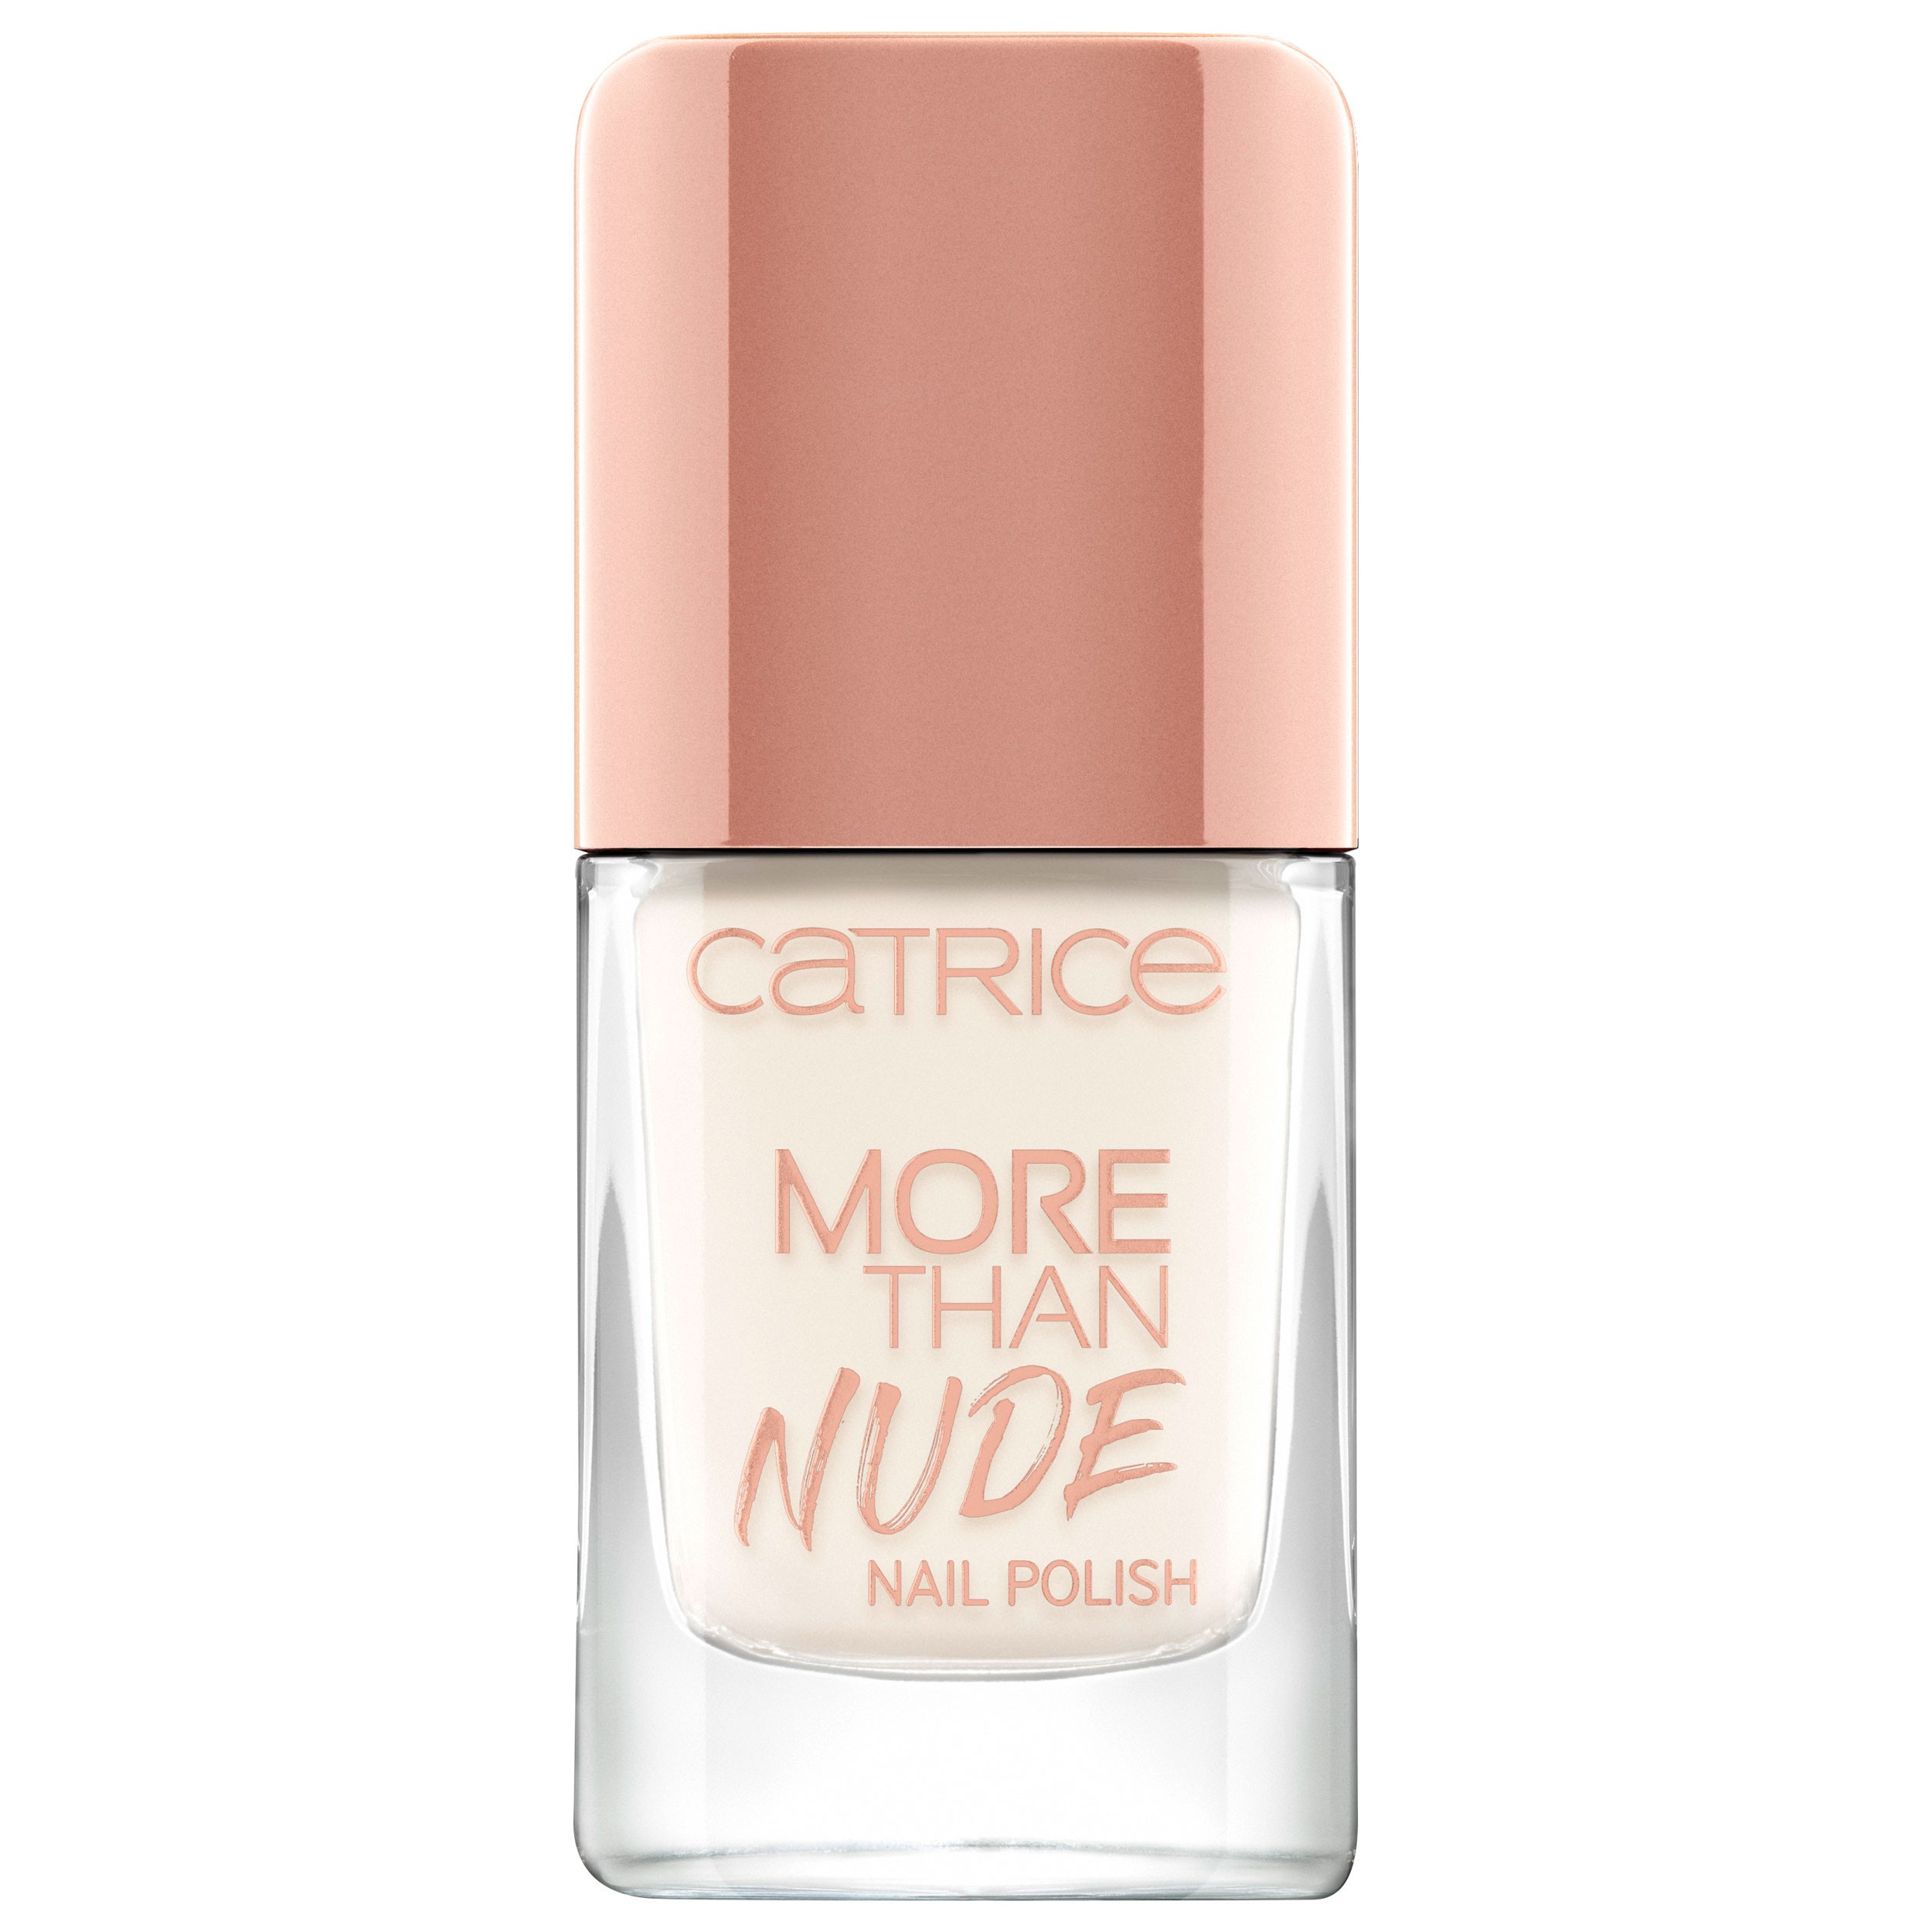 Catrice Nagellack More Than Nude Nail Polish Brownie Not 